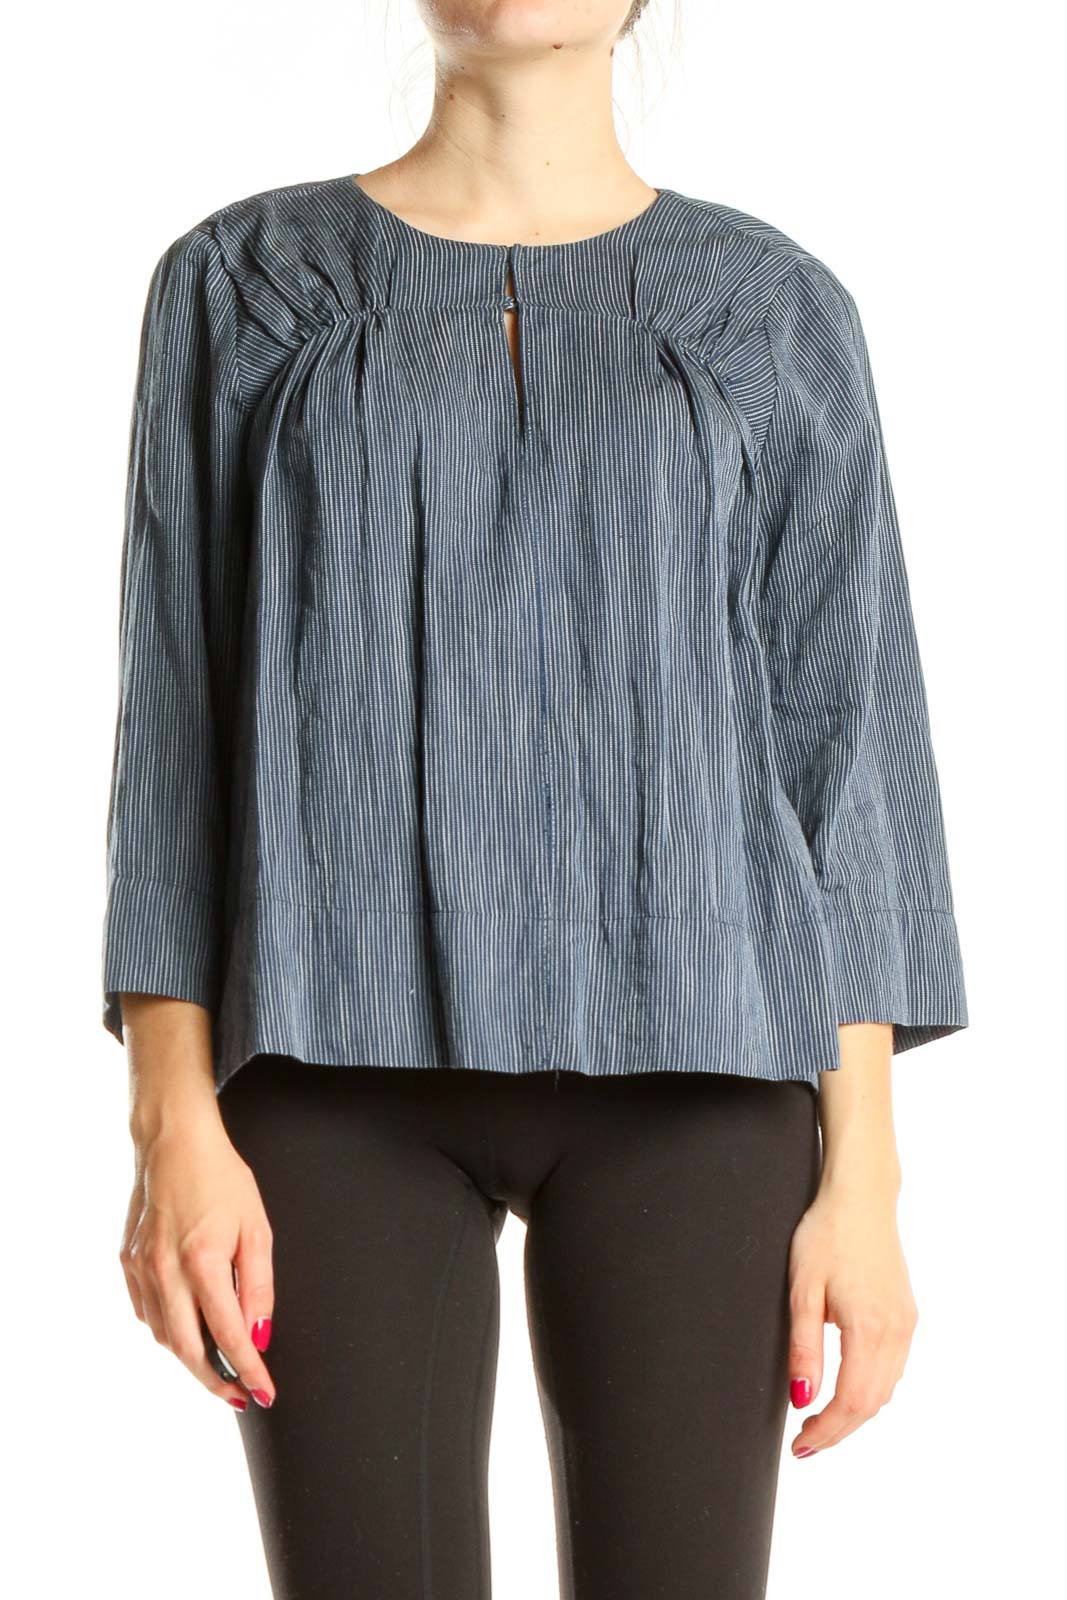 Blue Gray Striped Chic Blouse Front